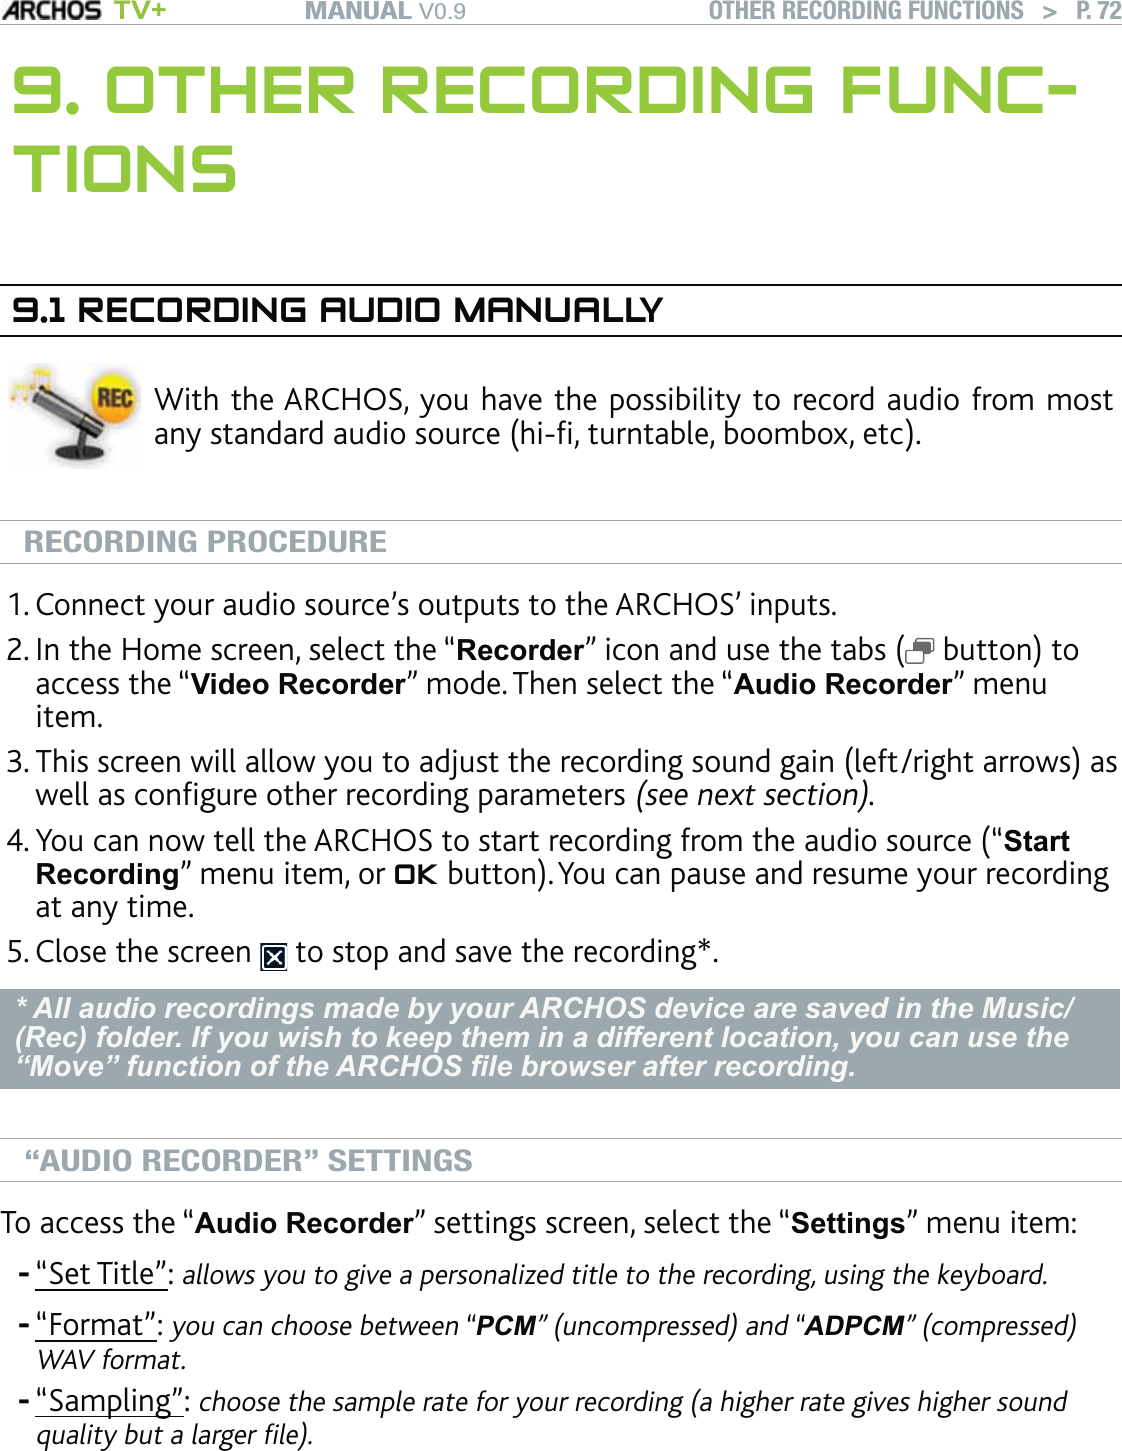 MANUAL V0.9 TV+ OTHER RECORDING FUNCTIONS   &gt;   P. 729. OTHER RECORDING FUNC-TIONS9.1 RECORDING AUDIO MANUALLYWith the ARCHOS, you have the possibility to record audio from most any standard audio source (hi-ﬁ, turntable, boombox, etc). RECORDING PROCEDUREConnect your audio source’s outputs to the ARCHOS’ inputs.In the Home screen, select the “Recorder” icon and use the tabs (  button) to access the “Video Recorder” mode. Then select the “Audio Recorder” menu item.This screen will allow you to adjust the recording sound gain (left/right arrows) as well as conﬁgure other recording parameters (see next section). You can now tell the ARCHOS to start recording from the audio source (“Start Recording” menu item, or OK button). You can pause and resume your recording at any time.Close the screen   to stop and save the recording*.* All audio recordings made by your ARCHOS device are saved in the Music/(Rec) folder. If you wish to keep them in a different location, you can use the “Move” function of the ARCHOS ﬁle browser after recording.“AUDIO RECORDER” SETTINGSTo access the “Audio Recorder” settings screen, select the “Settings” menu item:“Set Title”: allows you to give a personalized title to the recording, using the keyboard.“Format”: you can choose between “PCM” (uncompressed) and “ADPCM” (compressed) WAV format.“Sampling”: choose the sample rate for your recording (a higher rate gives higher sound quality but a larger ﬁle).Be careful that the audio source is supplying a line-level and not an ampli-ﬁed signal (turning down the volume of the player will work if you are using the headphone out signal of your audio device). A signal that is ampliﬁed too much will result in a terribly distorted recording.1.2.3.4.5.---